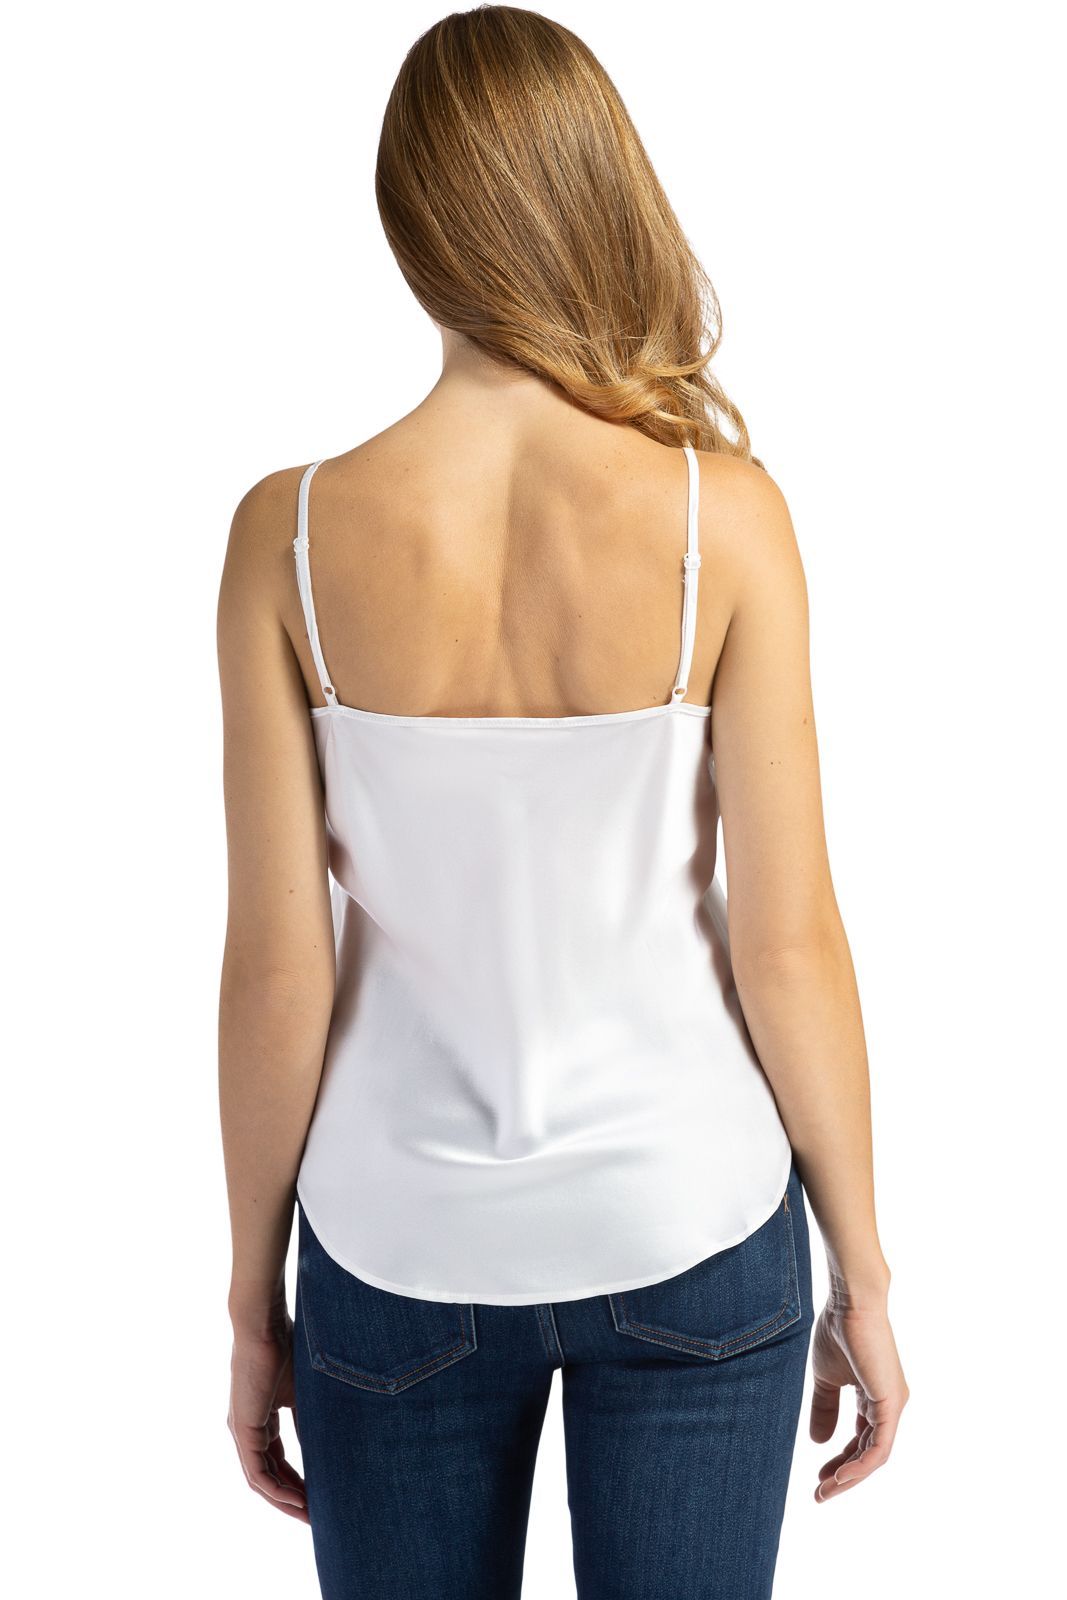 Women's 100% Pure Mulberry Silk Camisole Tank Top with Adjustable Spaghetti Straps - IMPROVED FIT Womens>Casual>Top Fishers Finery 